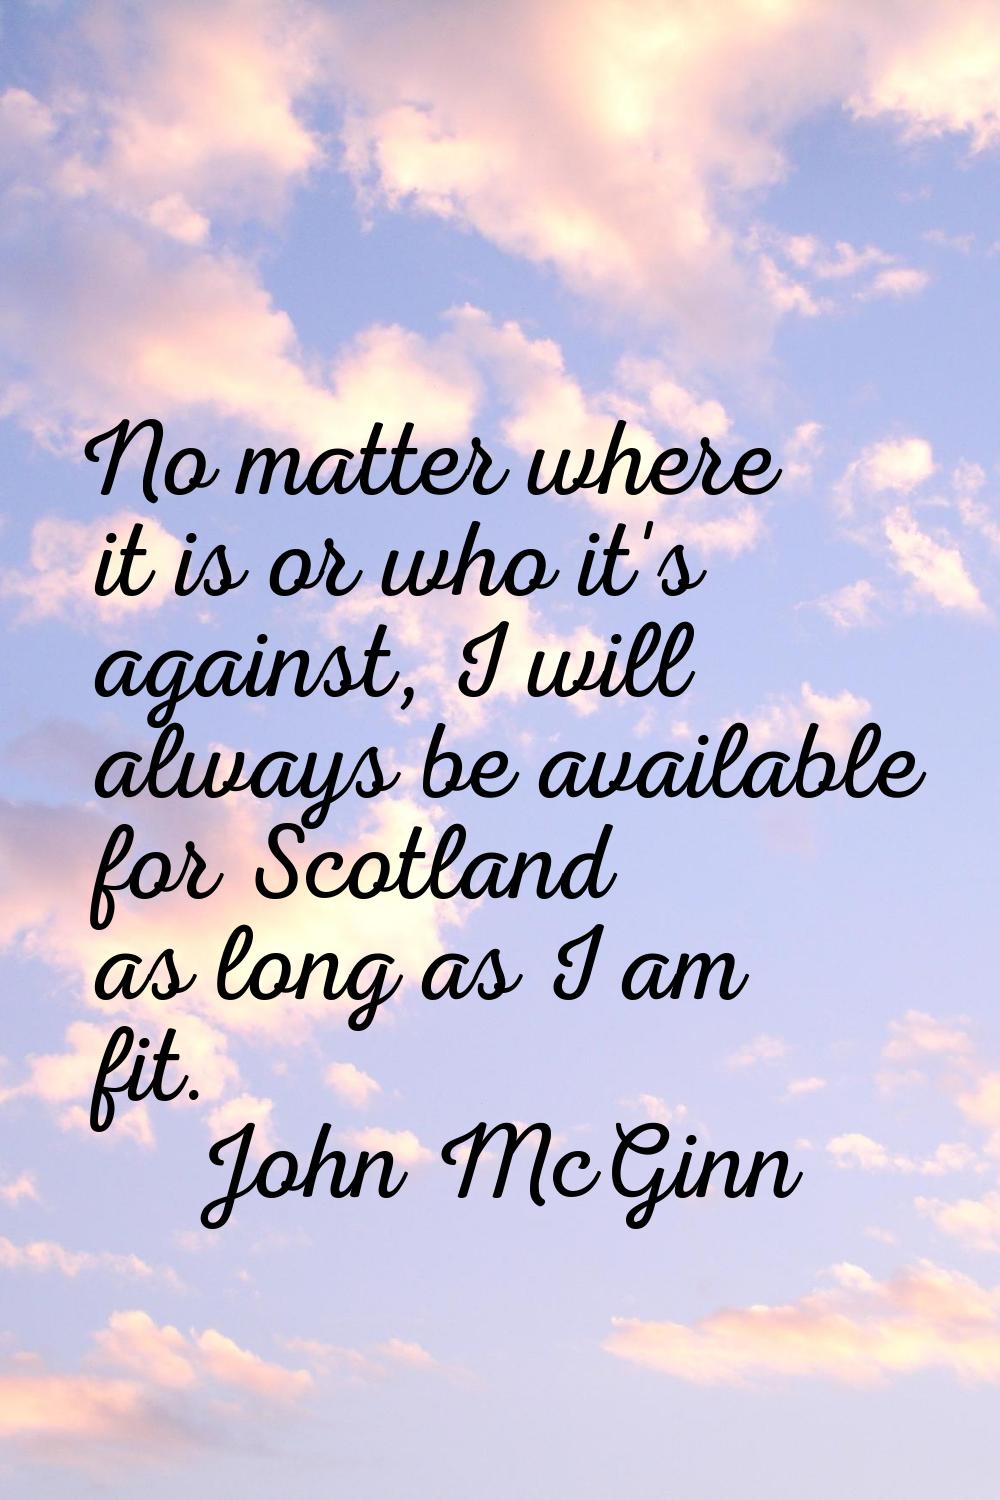 No matter where it is or who it's against, I will always be available for Scotland as long as I am 